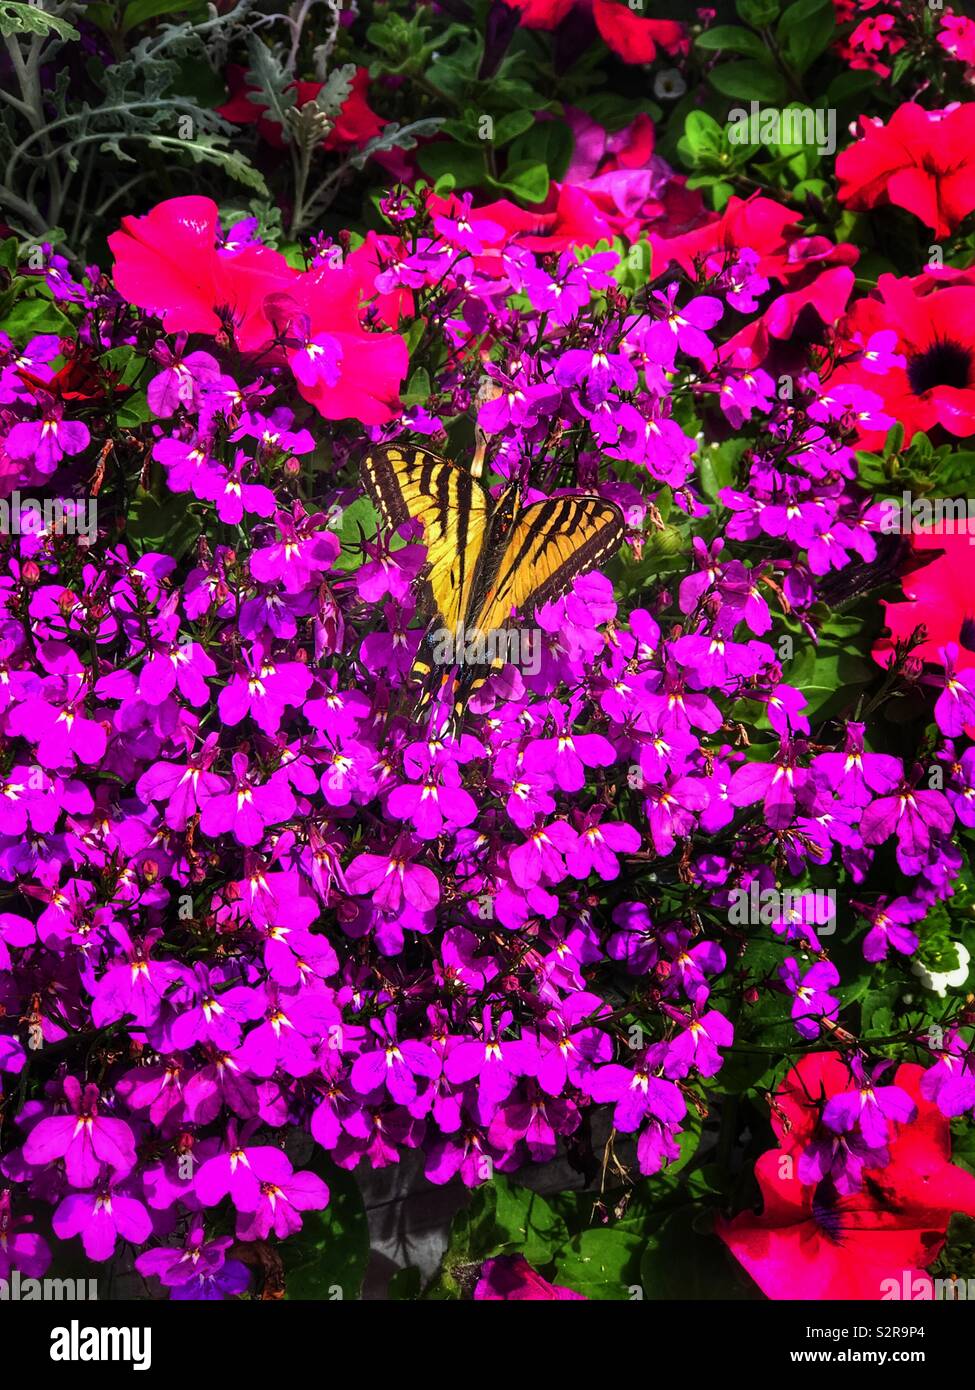 Yellow tailed butterfly sitting on hot pink flowers Stock Photo